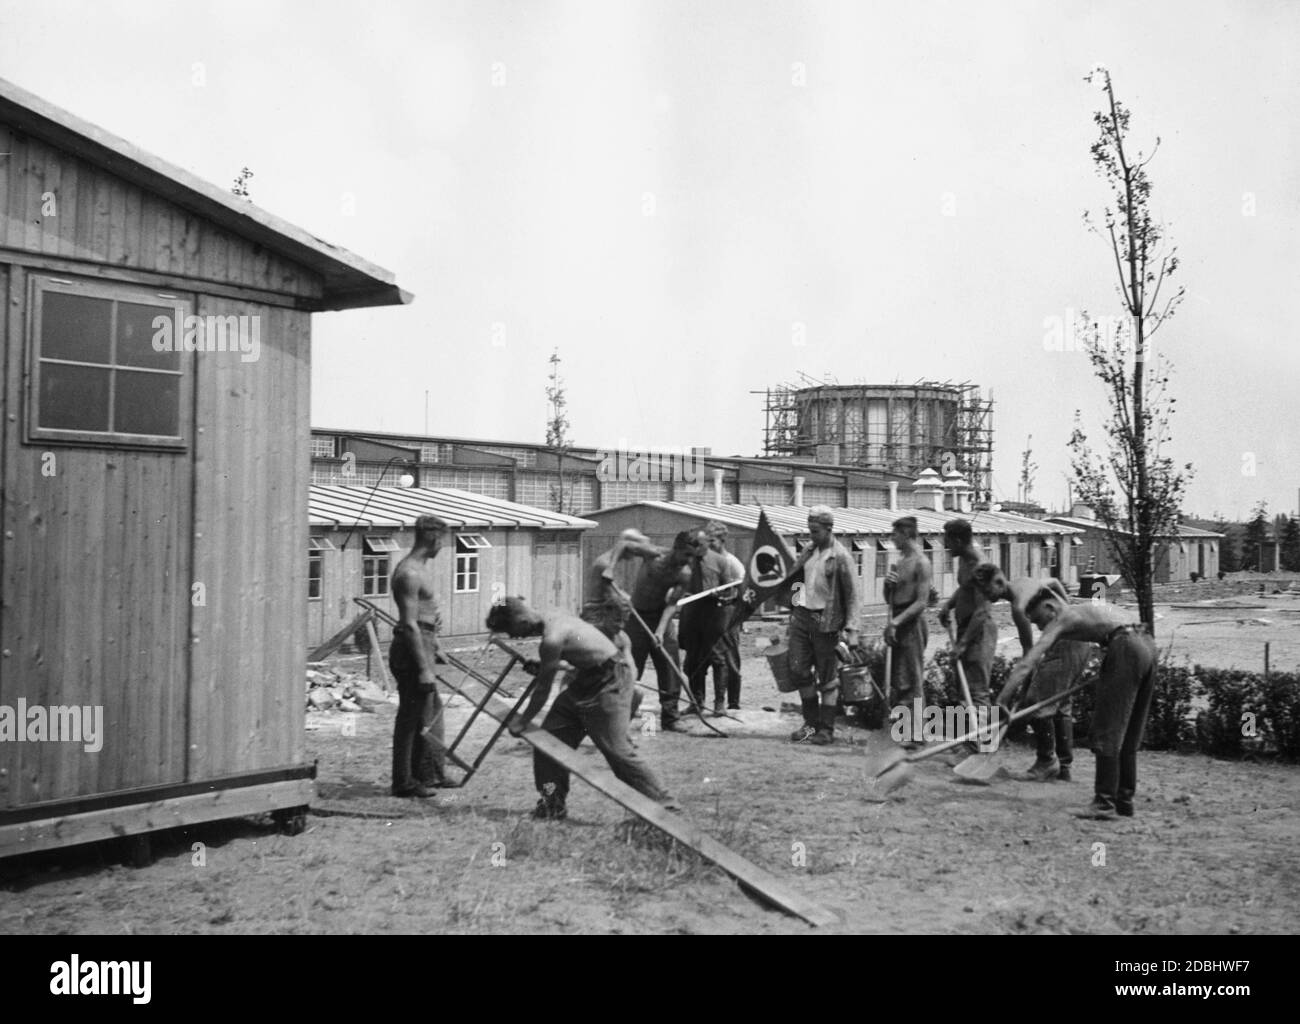 Members of the Labour Service are involved in the construction work for the Deutschlandausstellung (Germany exhibition) at Kaiserdamm in Berlin. In the background, the barracks of the Labour Service. Stock Photo